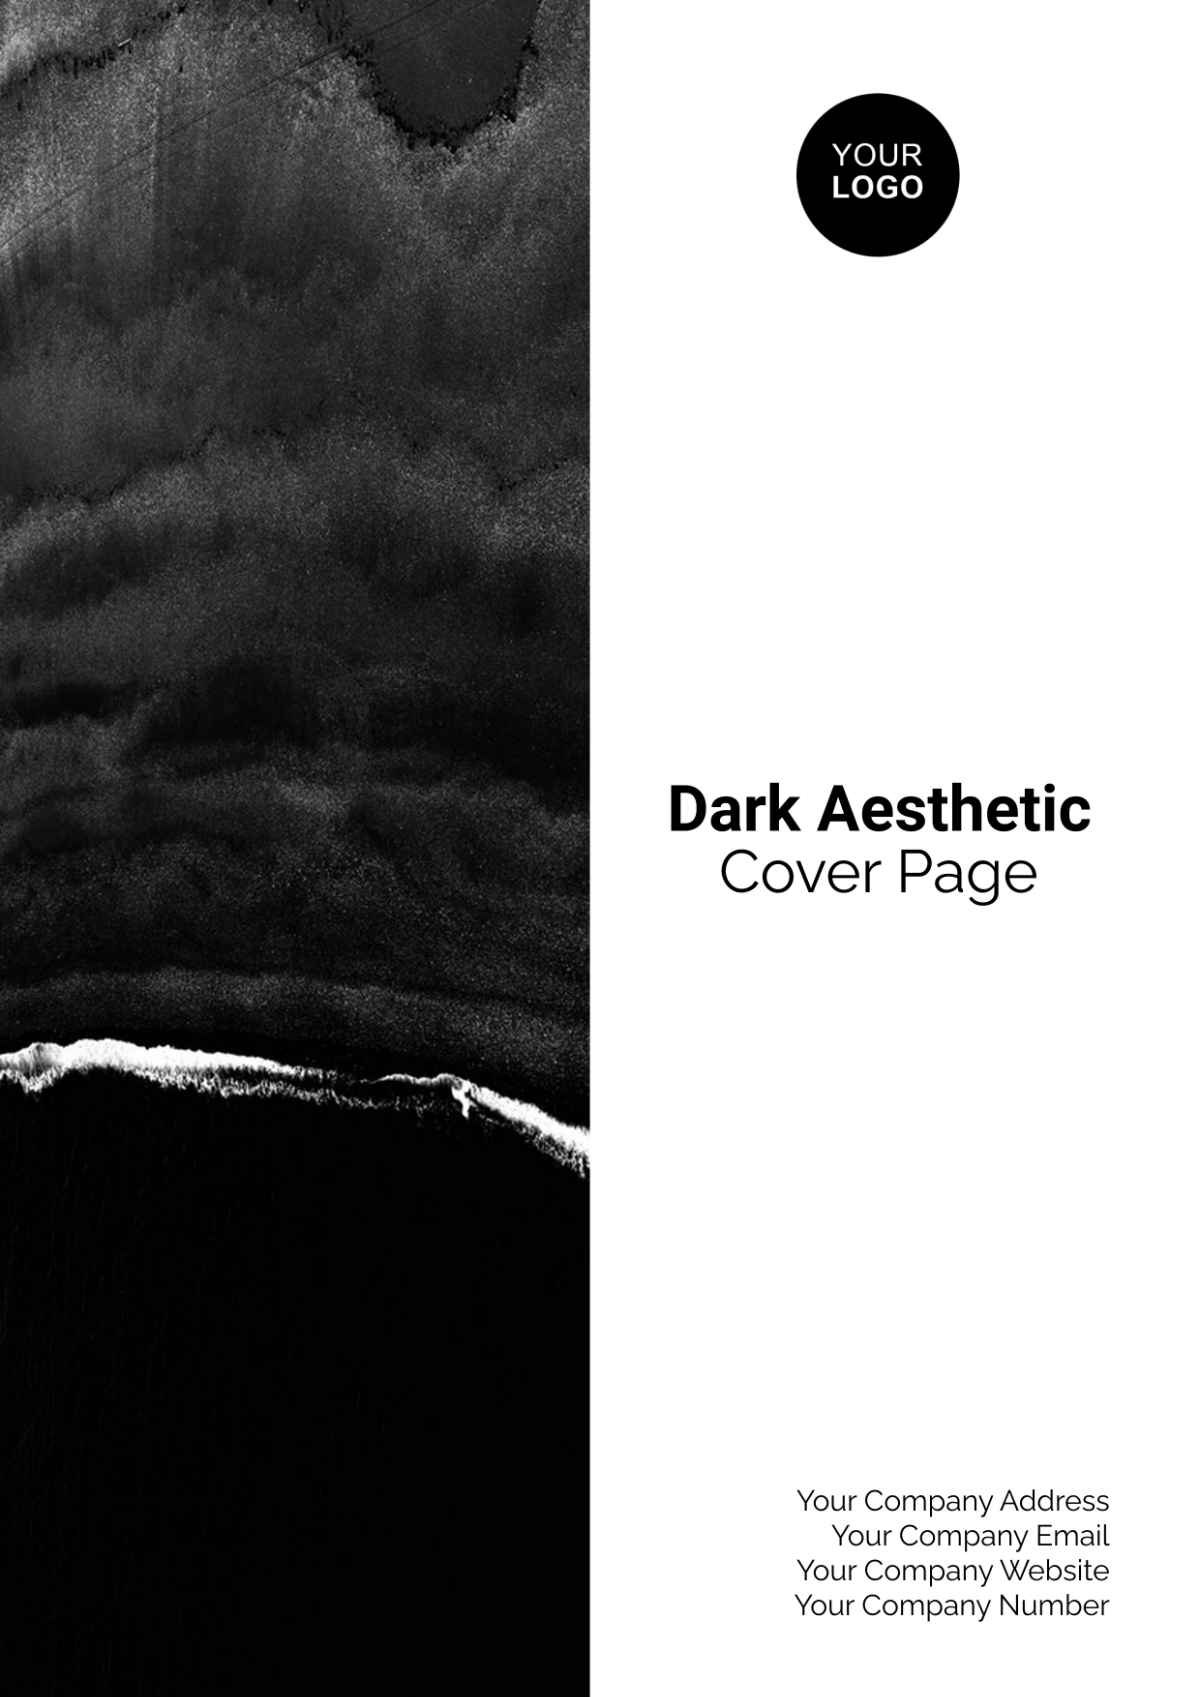 Dark Aesthetic Cover Page